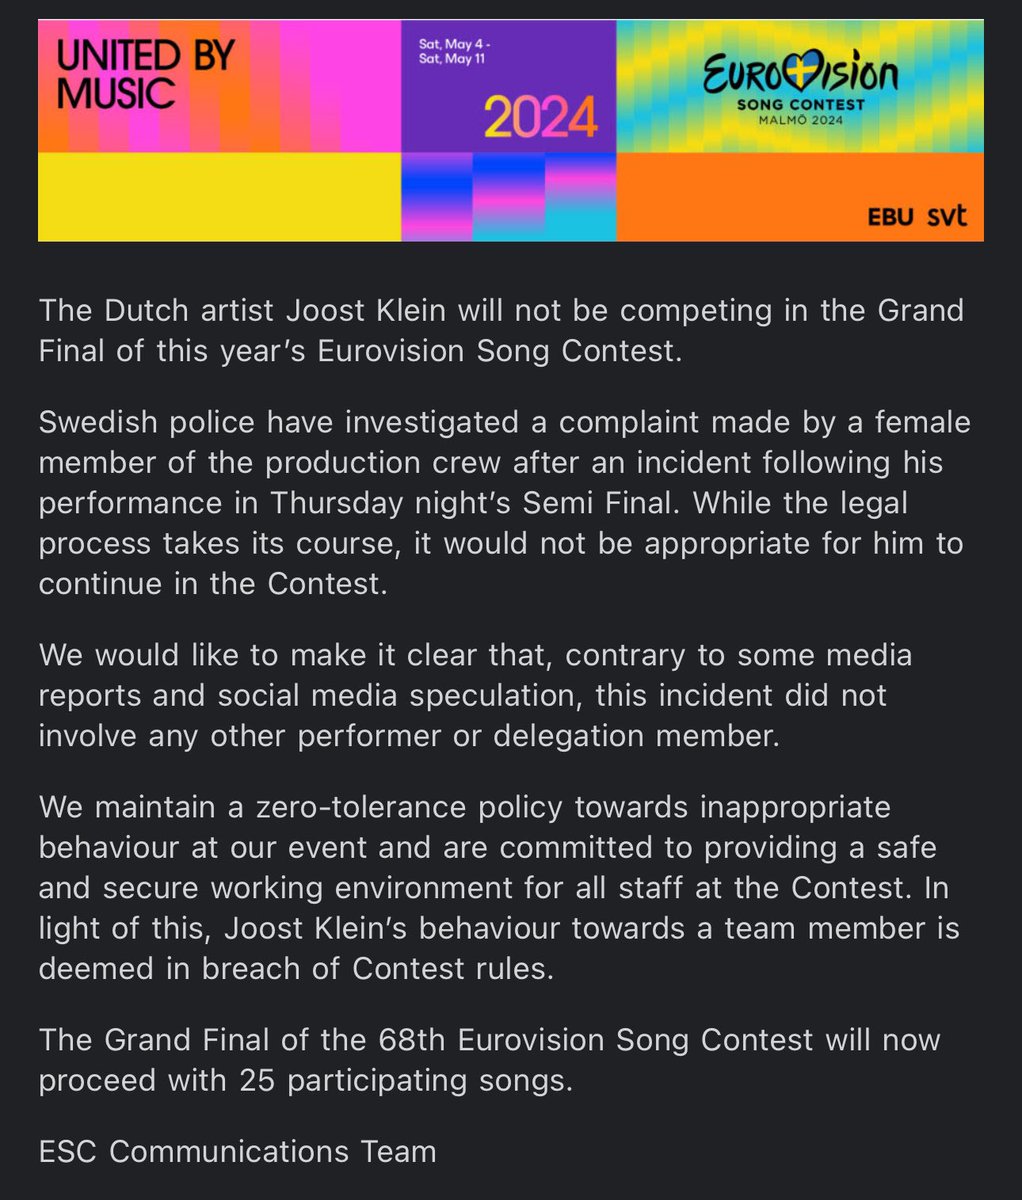 EUROVISION IS A FUCKING JOKE! Joost gets banned for an altercation after being insulted, and we have Israel in the contest that is massively killing innocent children every single day. Fuck this! #eurovision